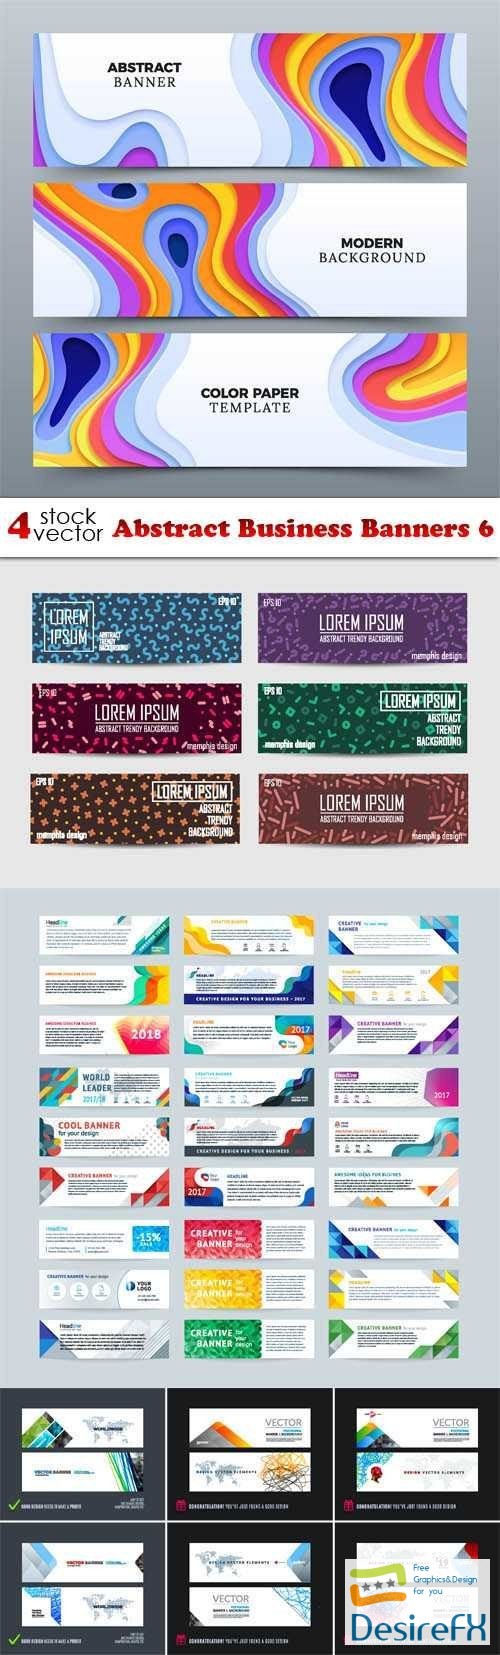 Abstract Business Banners 6